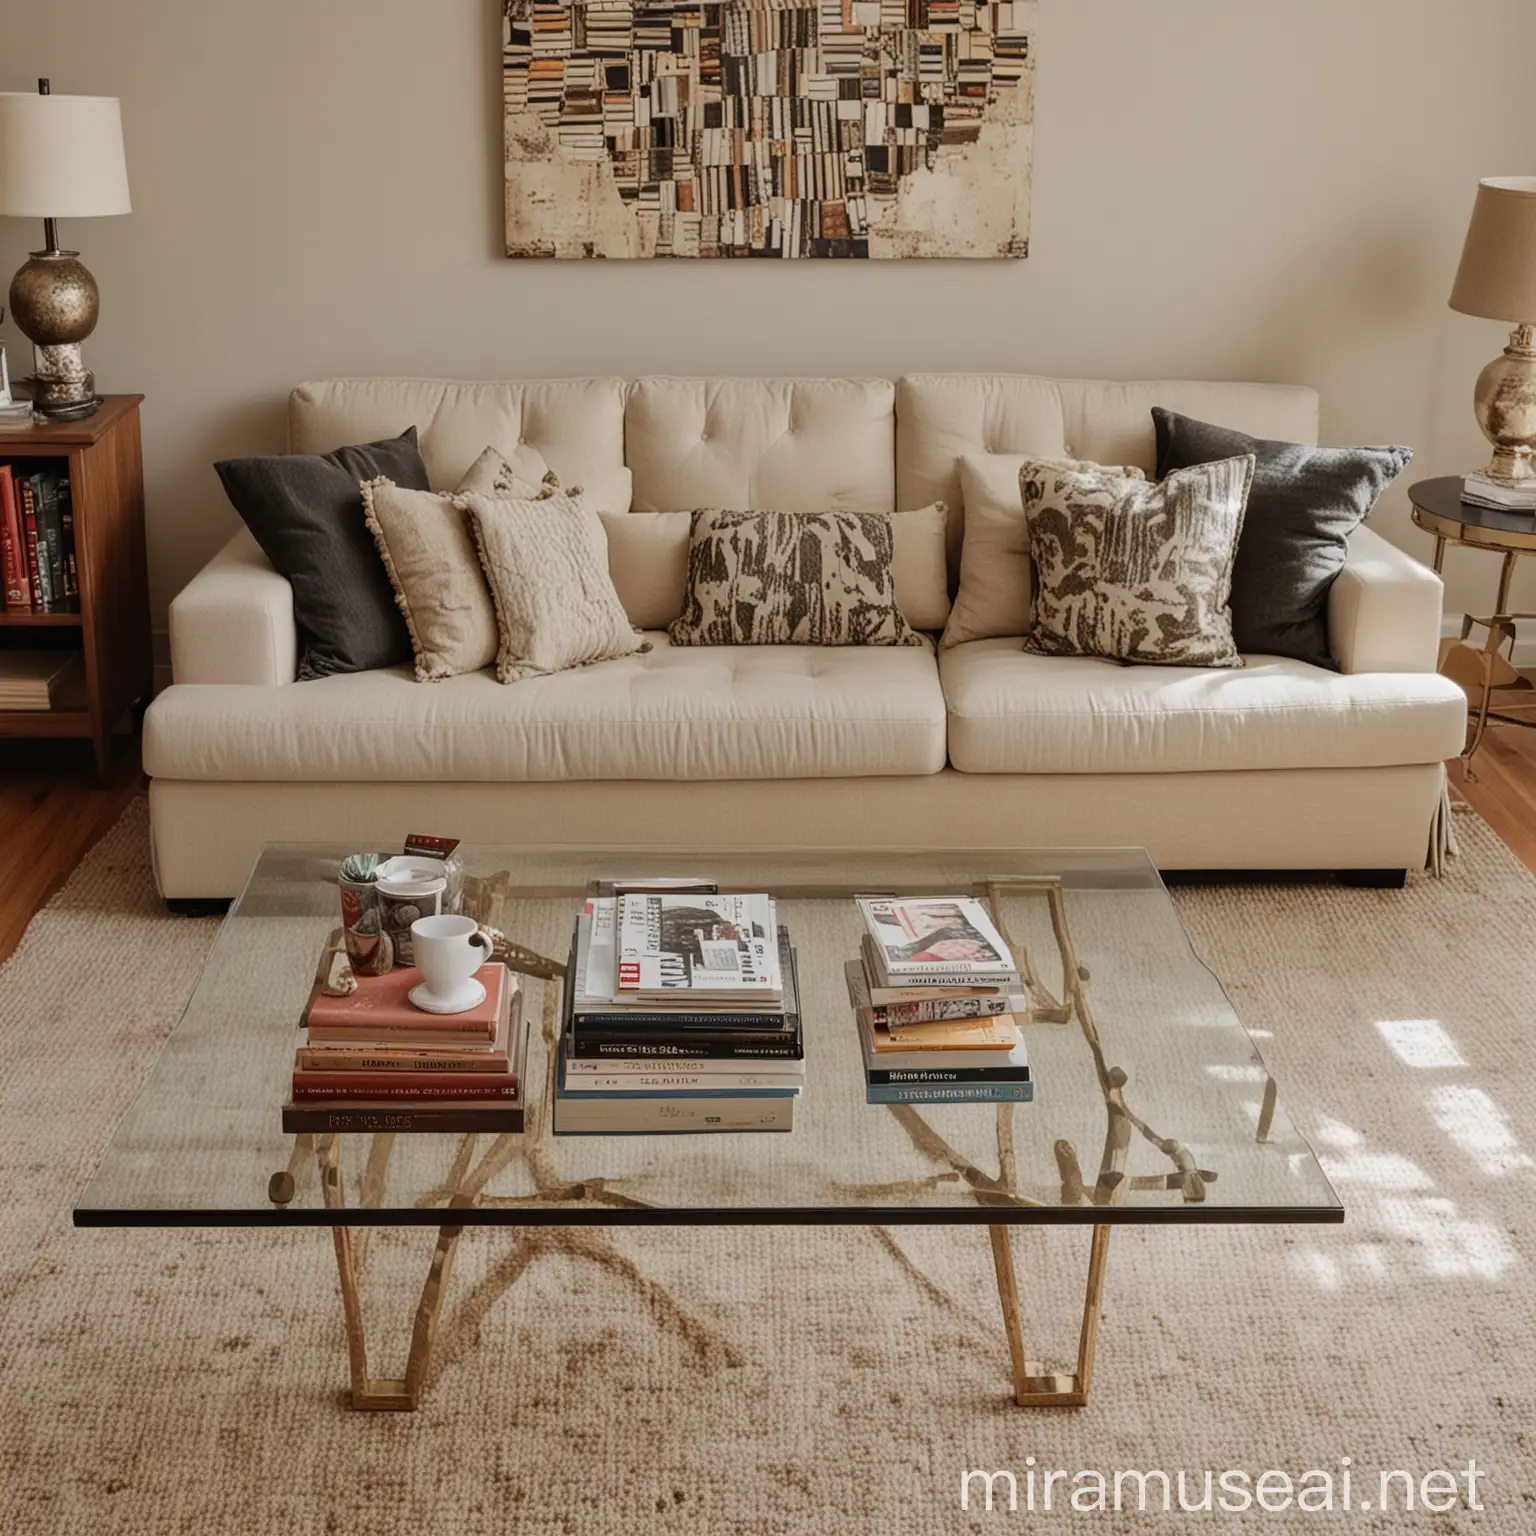 Cozy Living Room with Decorative Books on Coffee Table